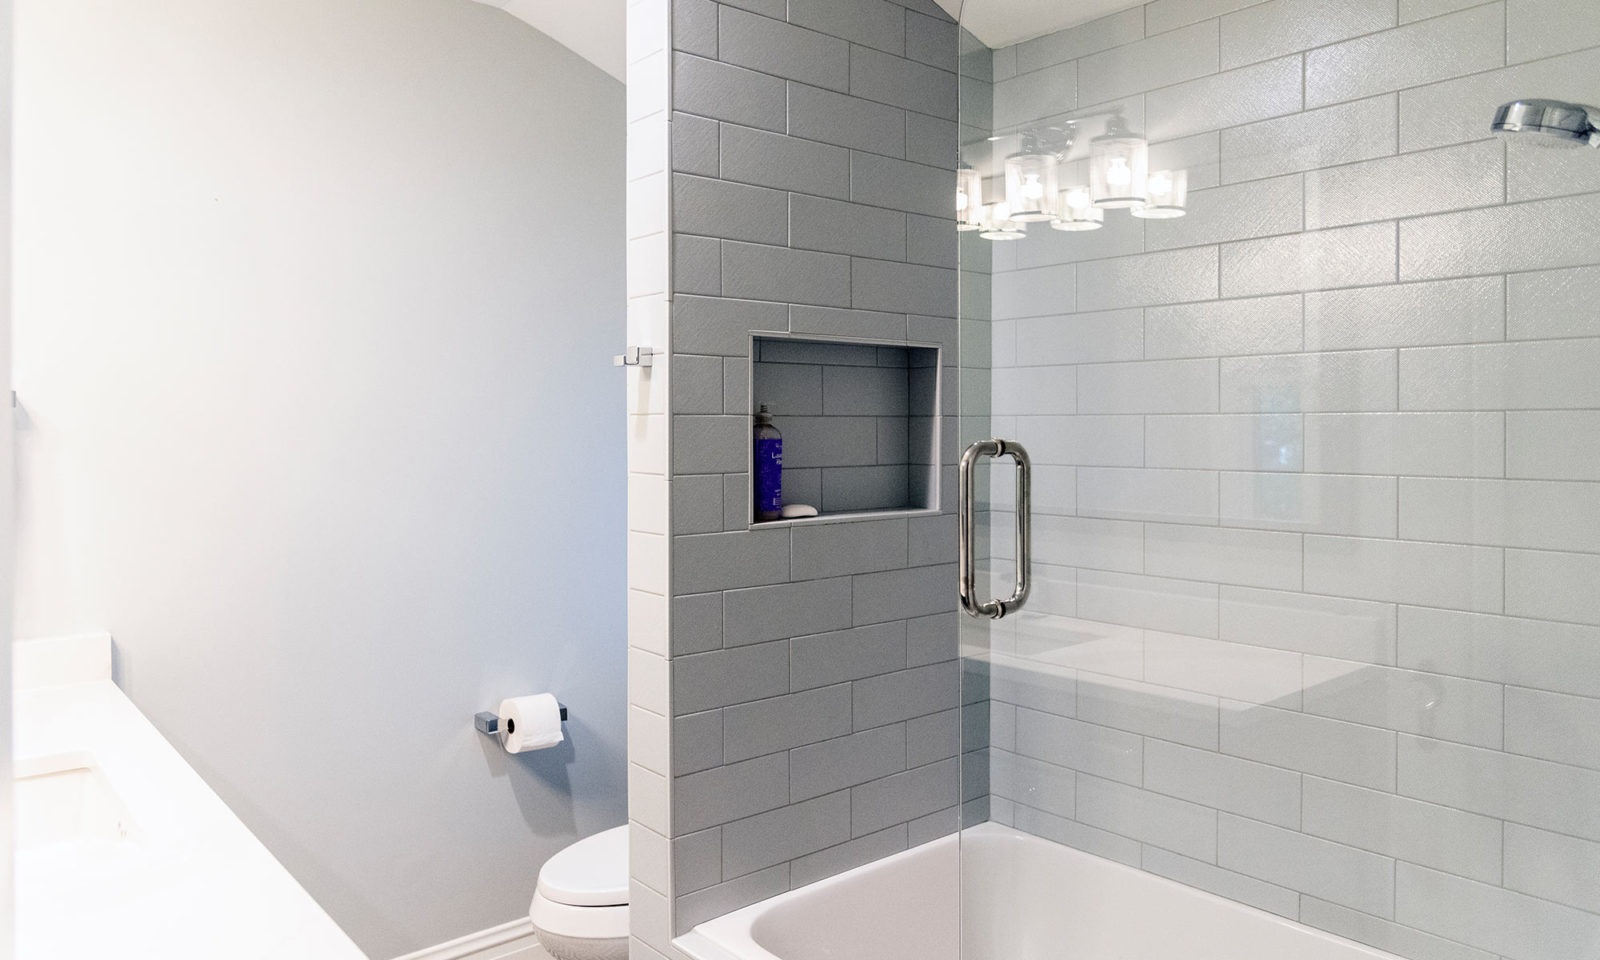 Newly renovated bathroom with white/gray tile in the shower